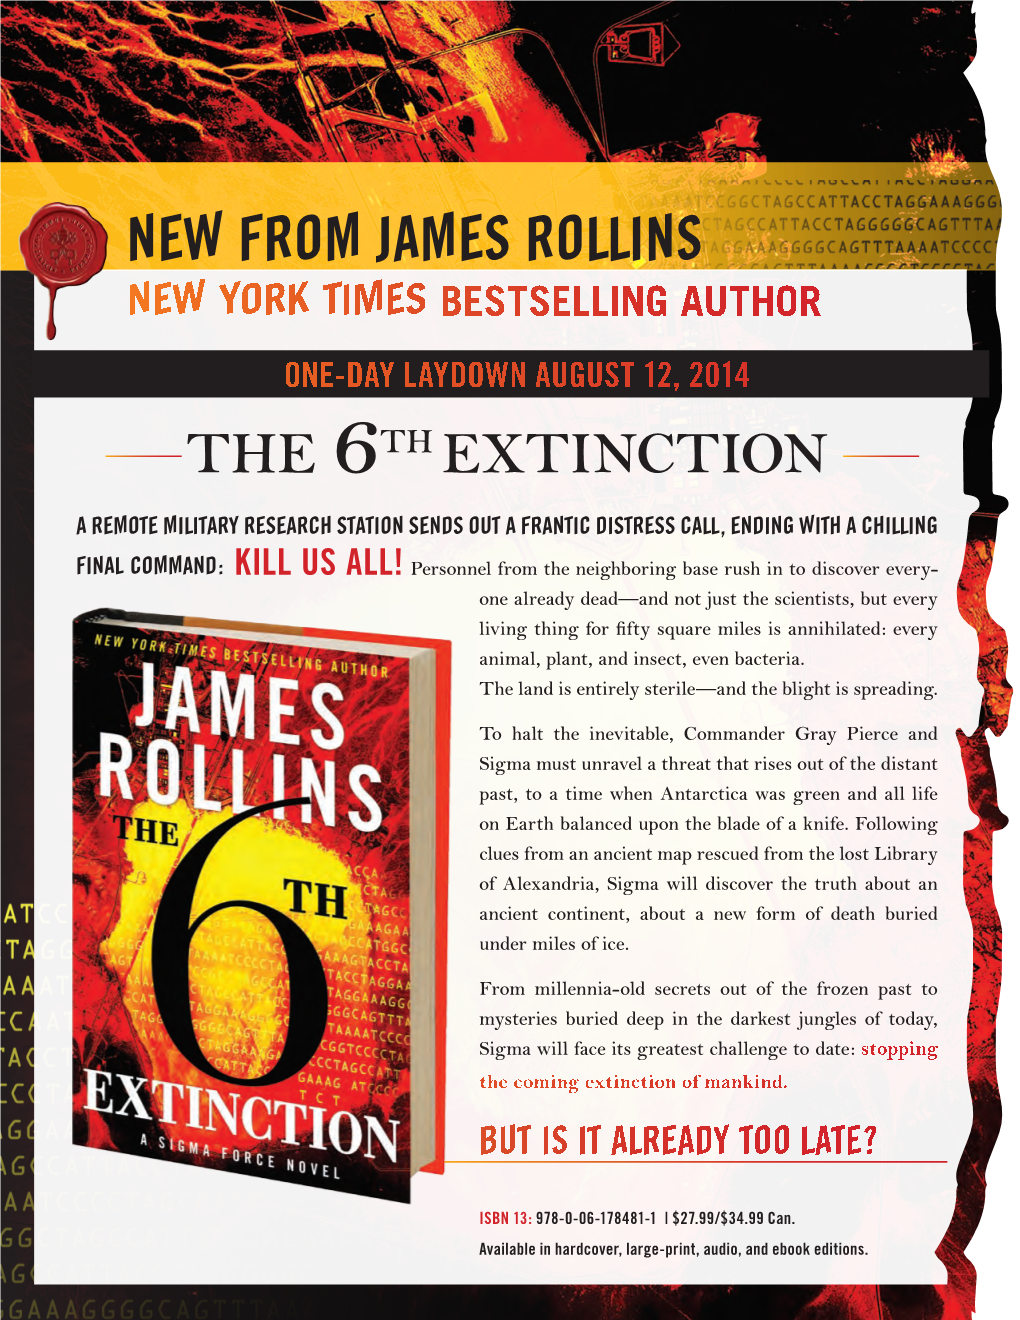 New from James Rollins the 6Th Extinction